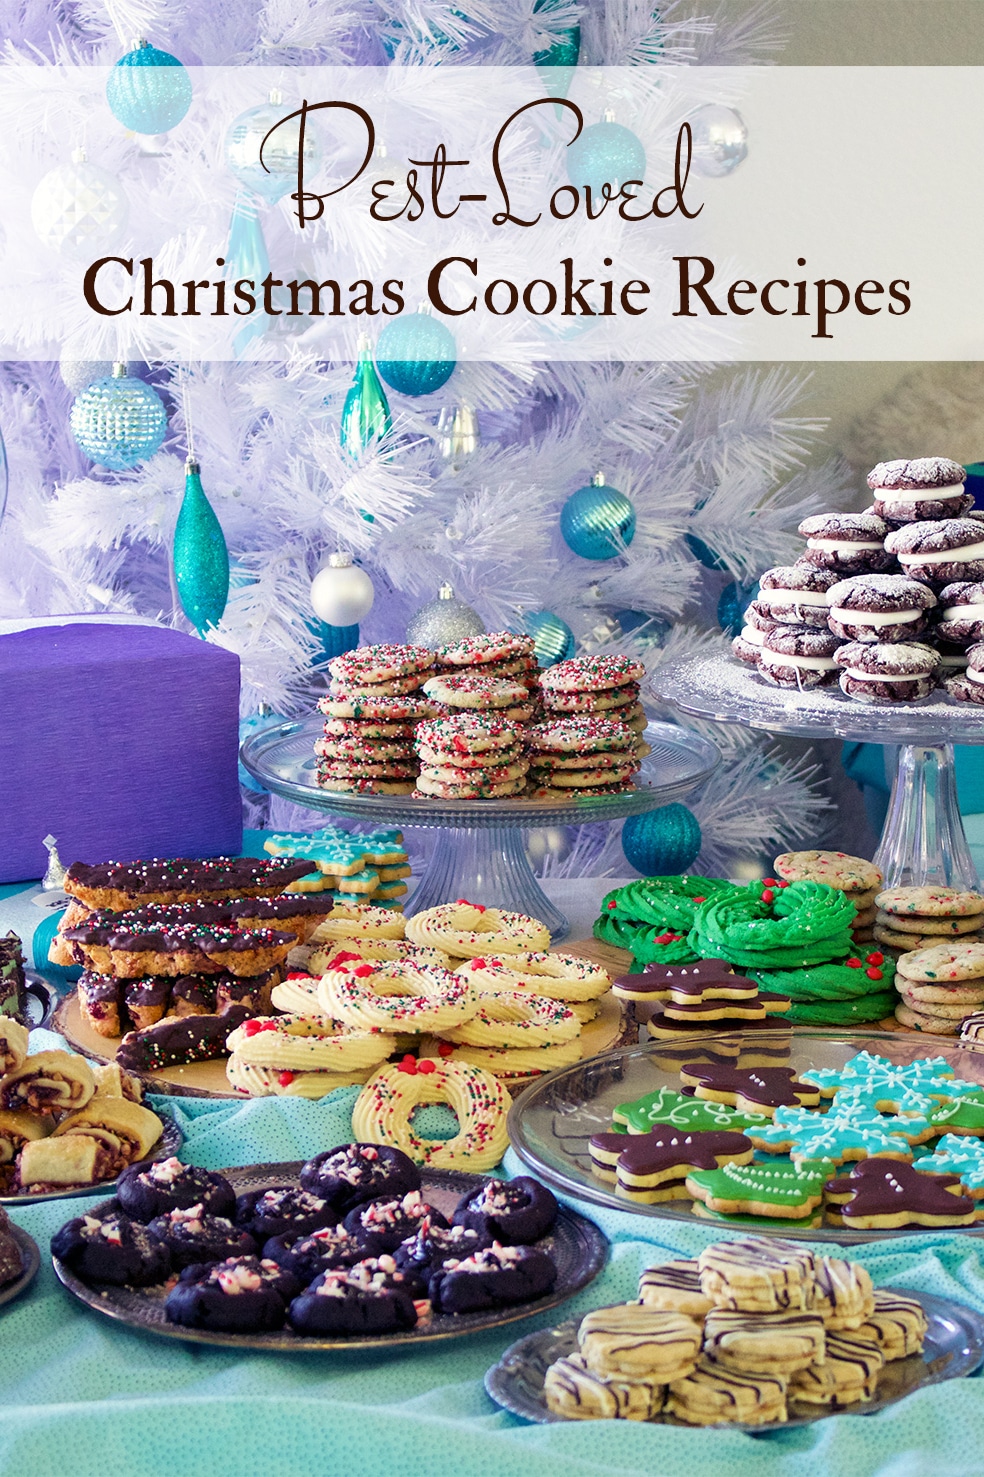 A table with stacks of 11 different kinds of Christmas Cookies